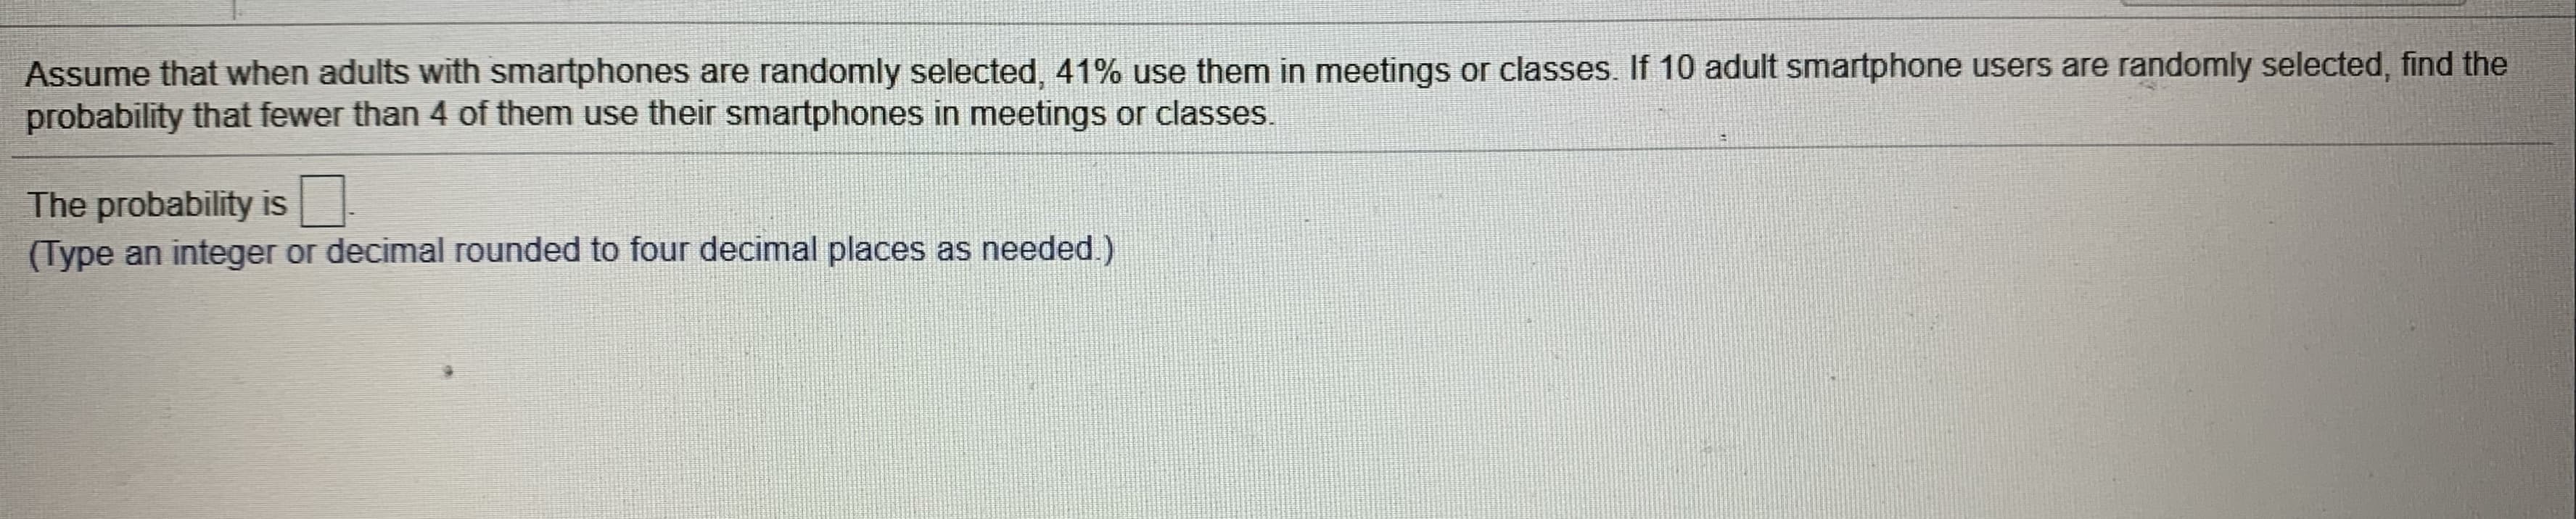 Assume that when adults with smartphones are randomly selected, 41% use them in meetings or classes. If 10 adult smartphone users are randomly selected, find the
probability that fewer than 4 of them use their smartphones in meetings or classes.
The probability is.
(Type an integer or decimal rounded to four decimal places as needed.)
